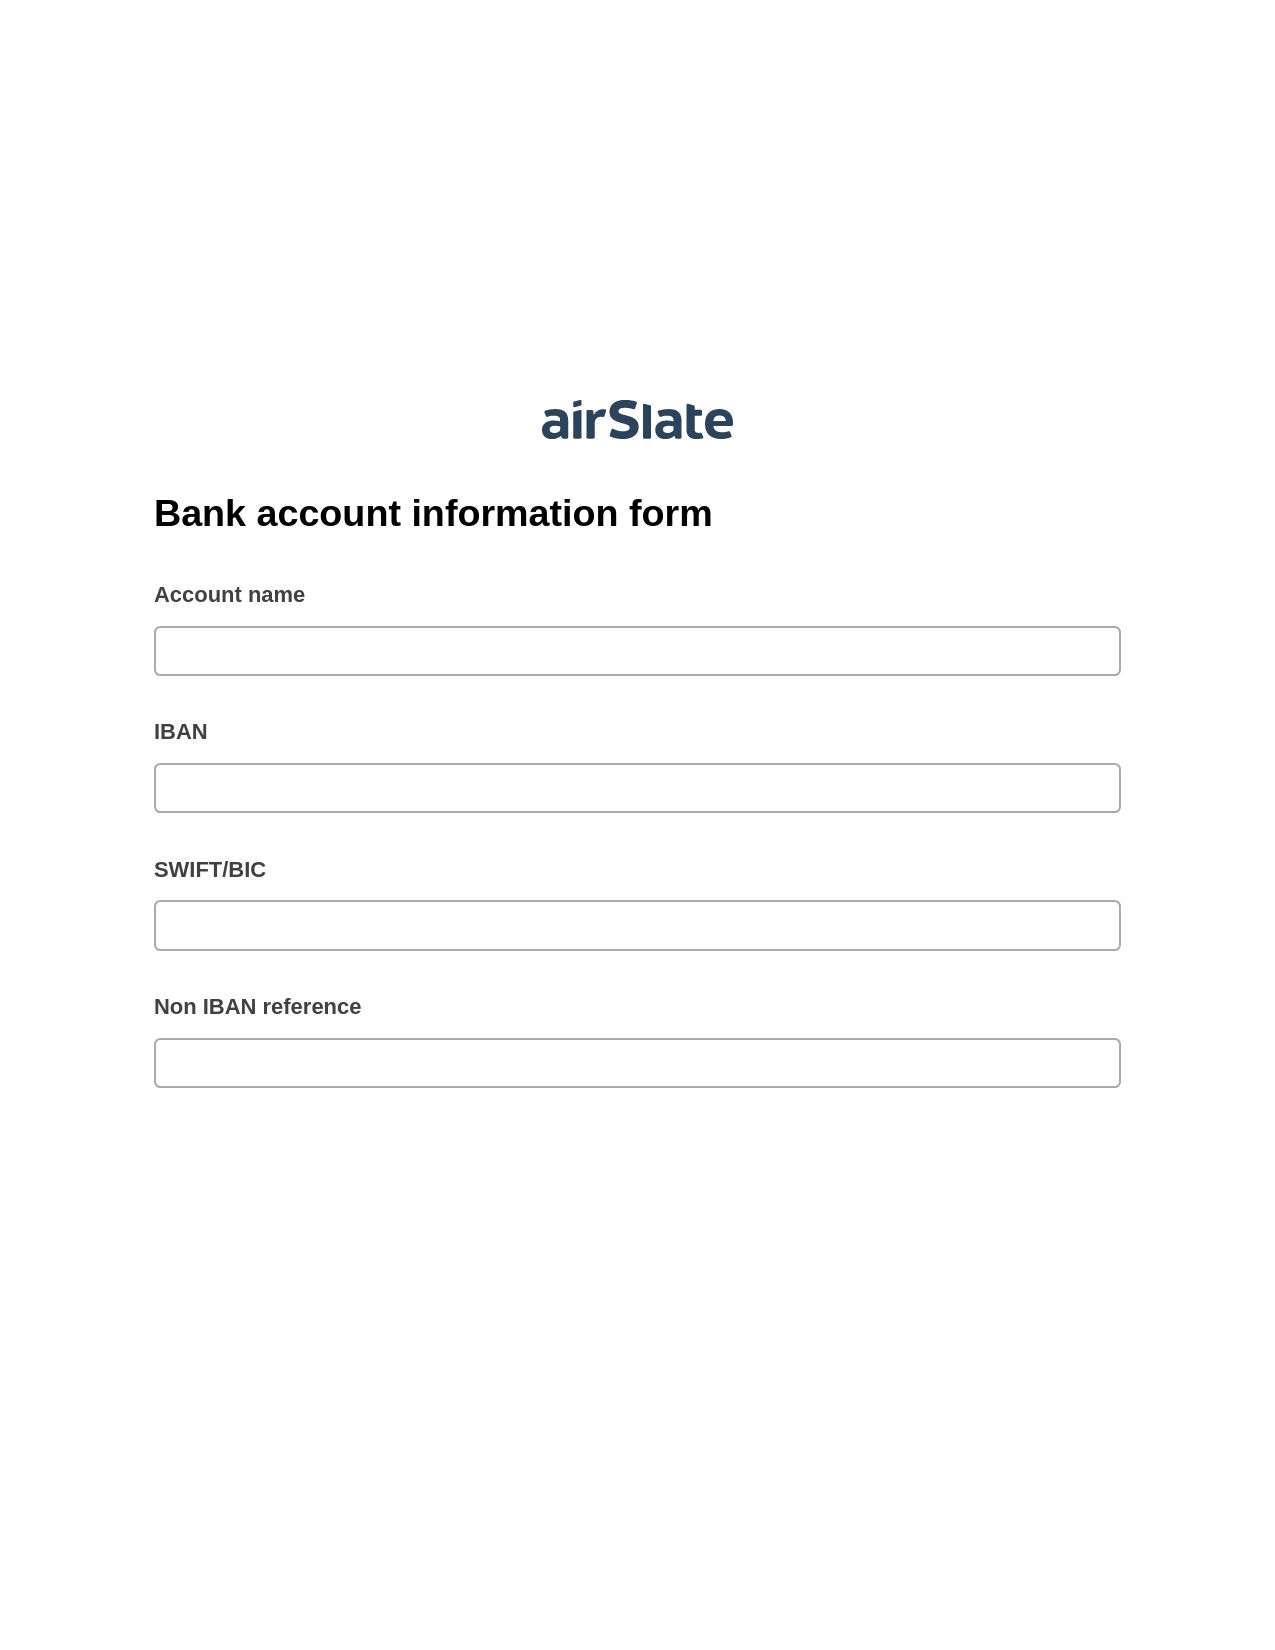 Multirole Bank account information form Pre-fill from Litmos bot, Document Hide Bot, Export to NetSuite Record Bot